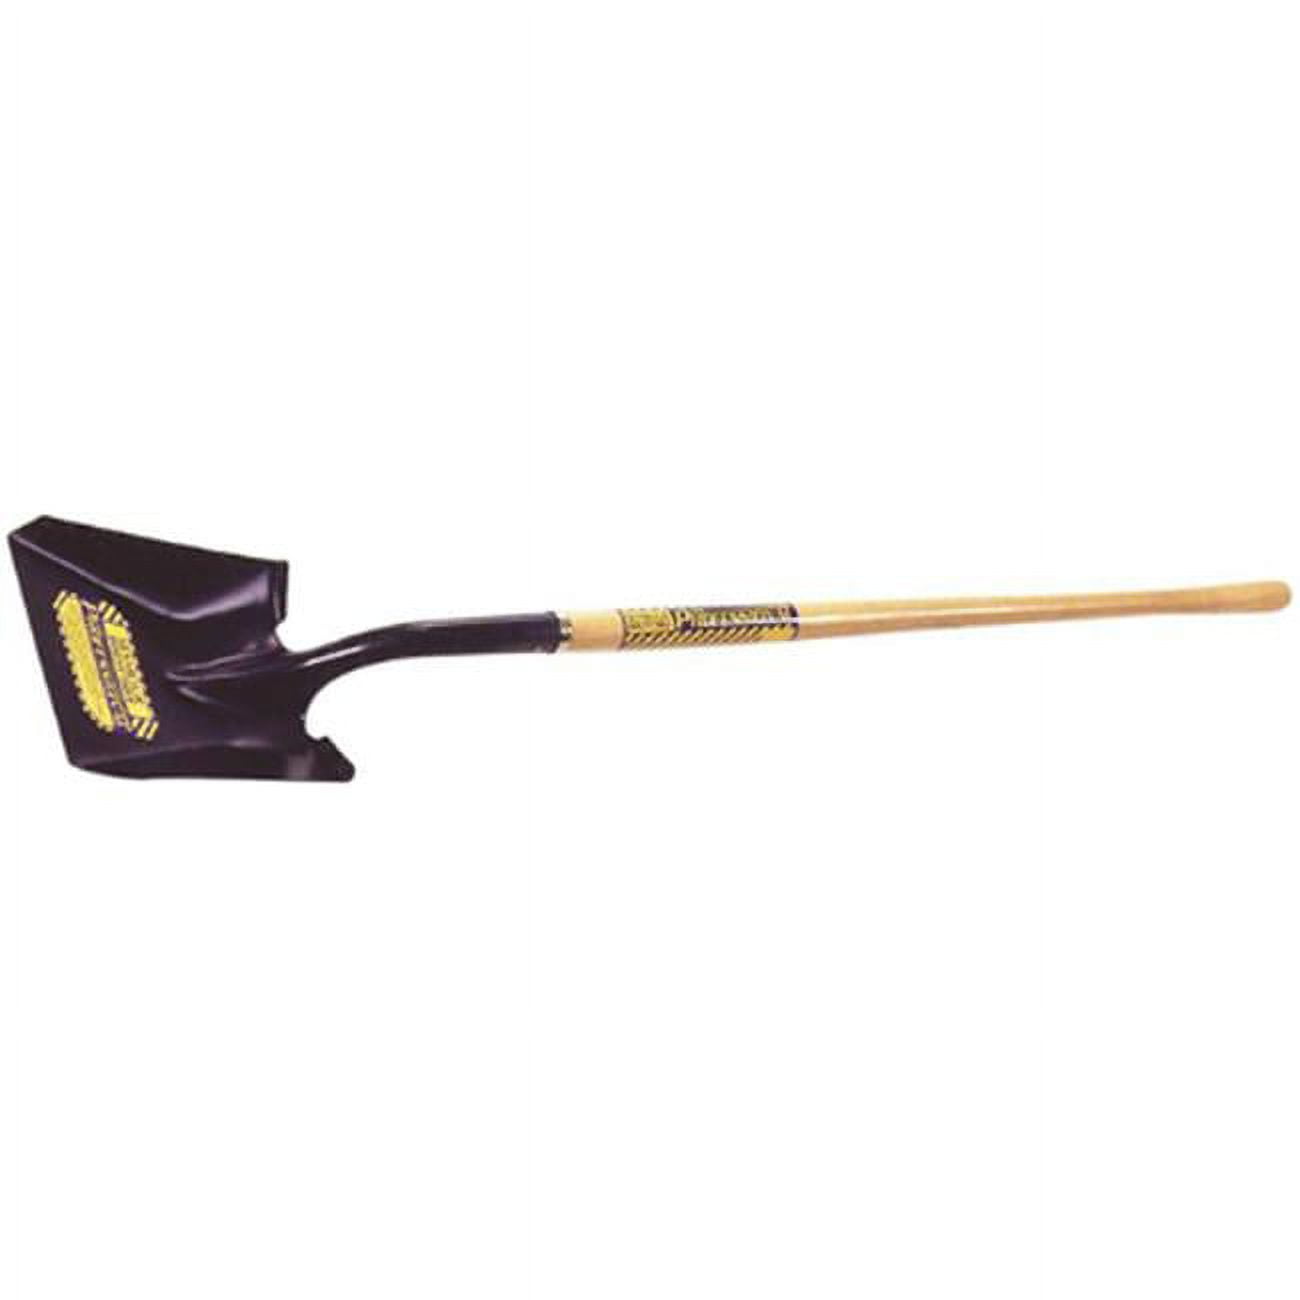 49152 Square Point Shovel With 48 In. Hardwood Handle